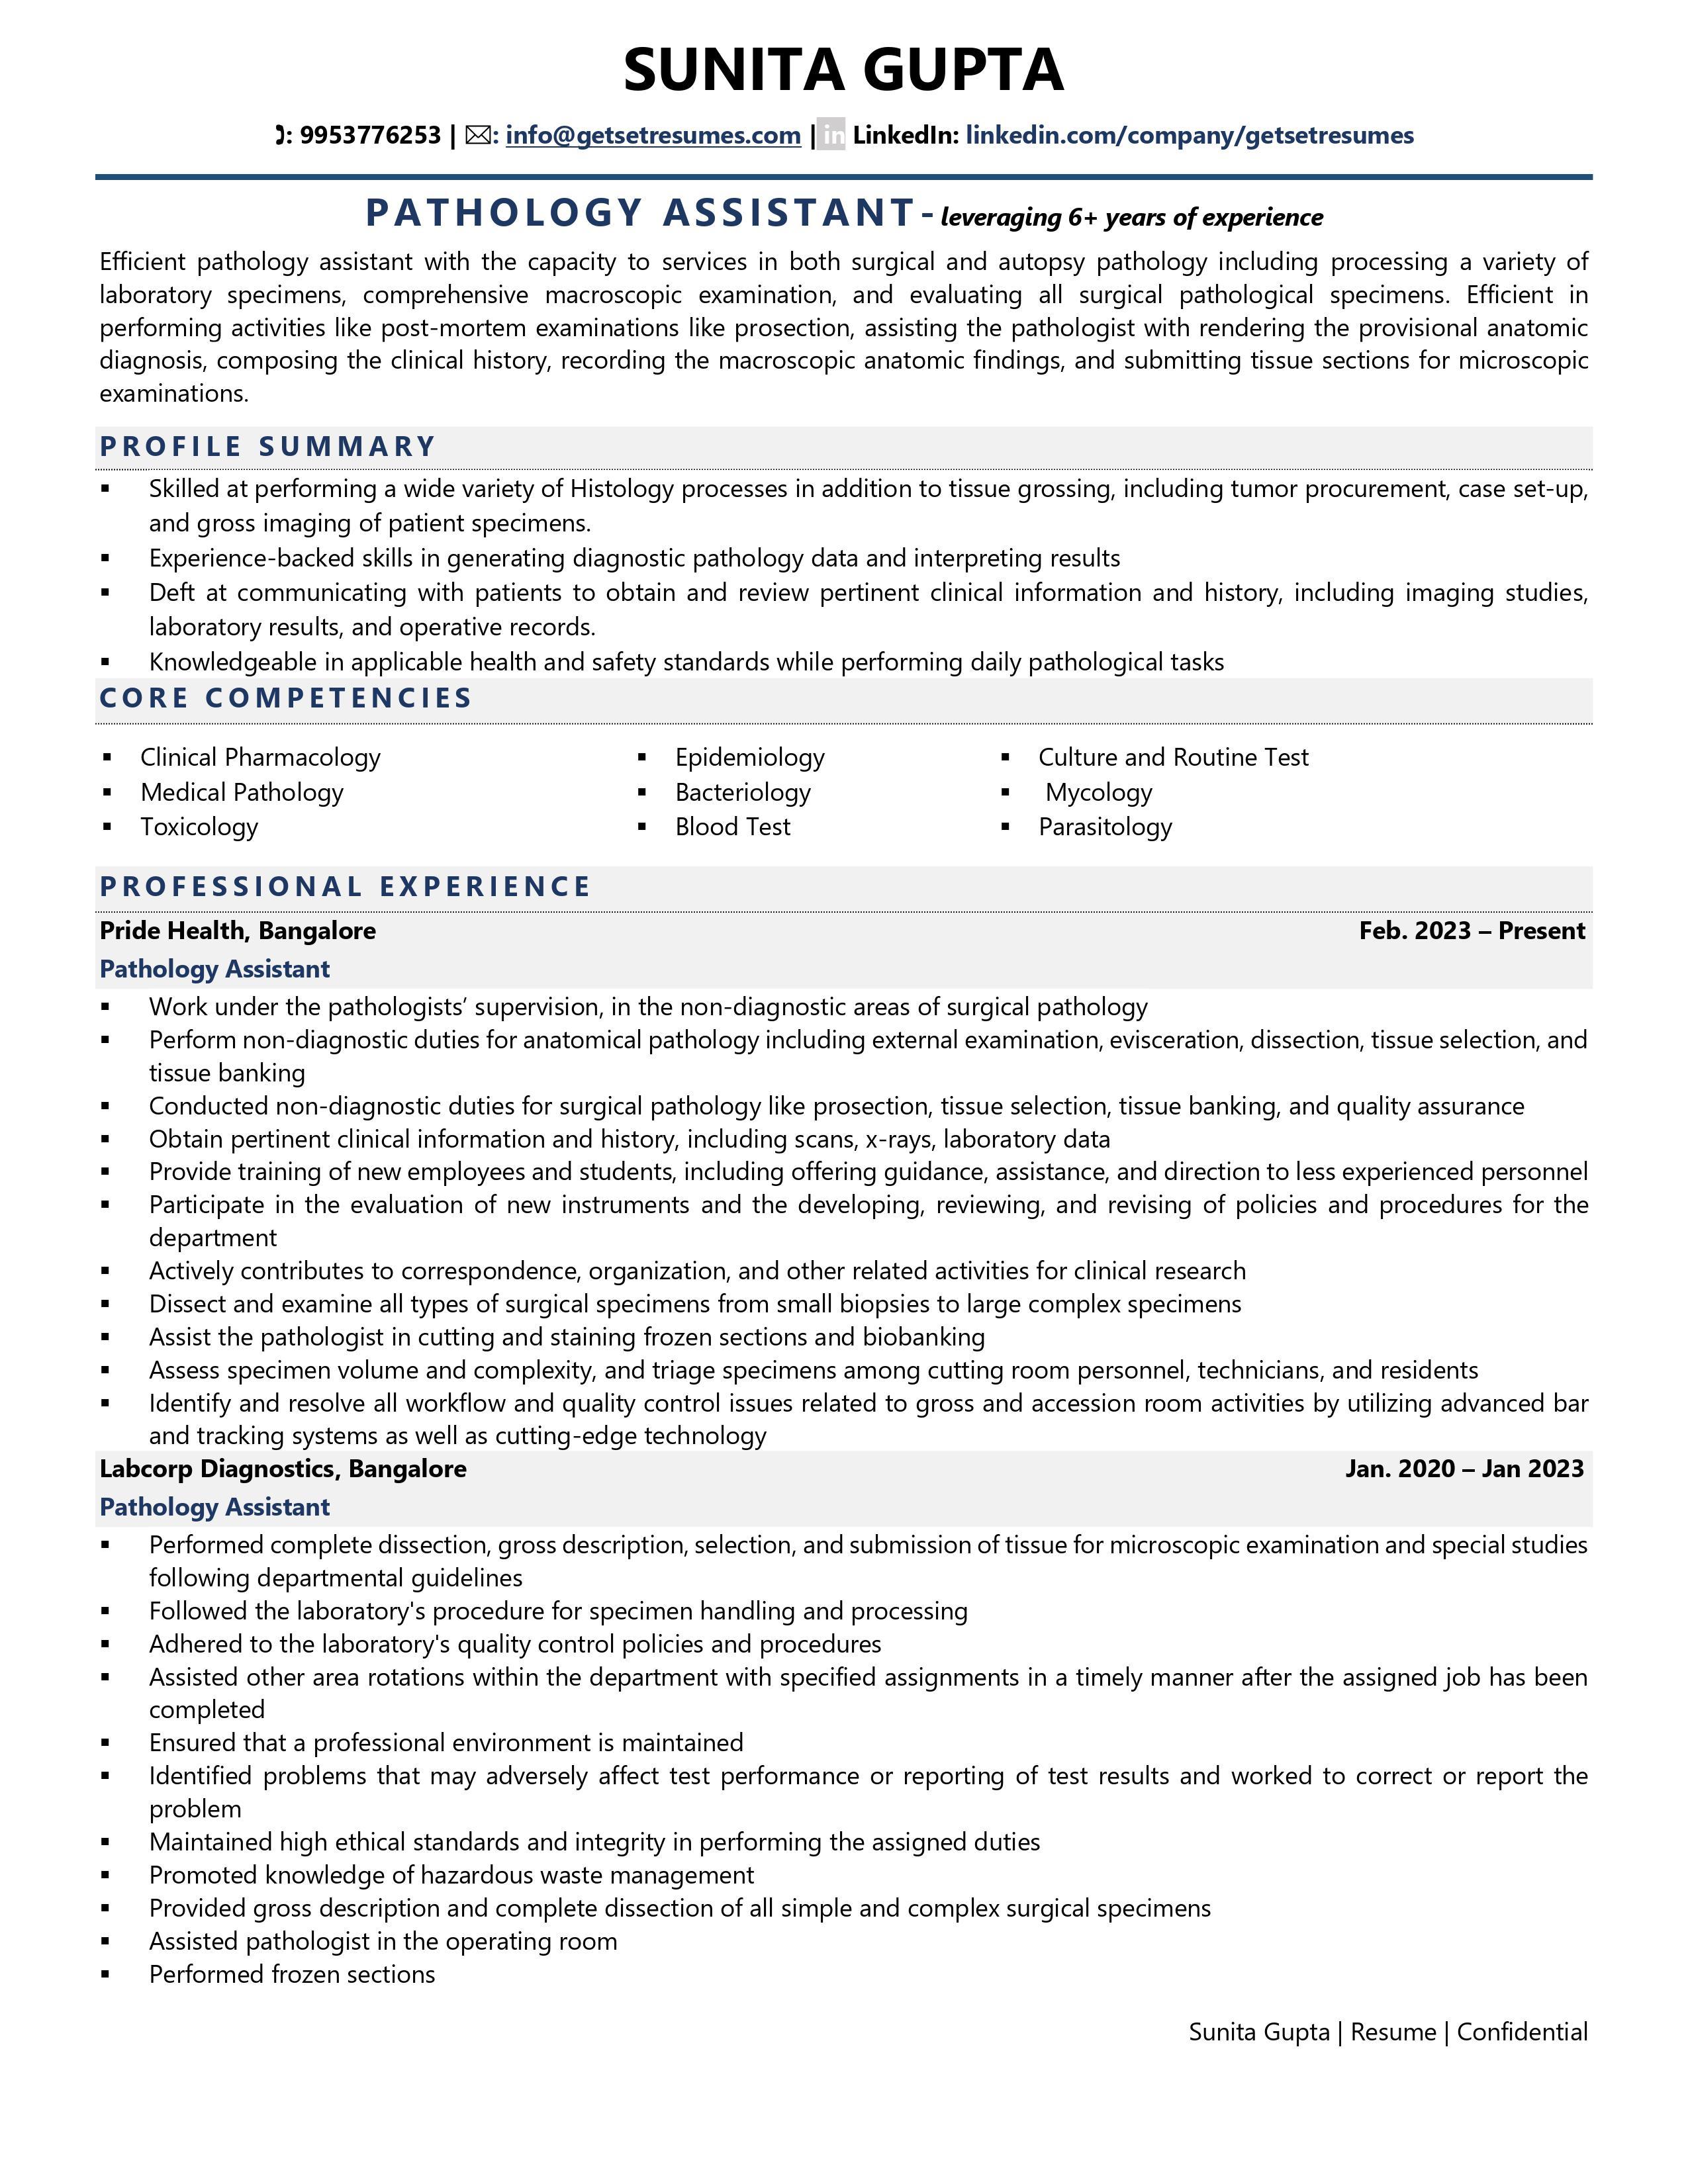 Pathology Assistant - Resume Example & Template